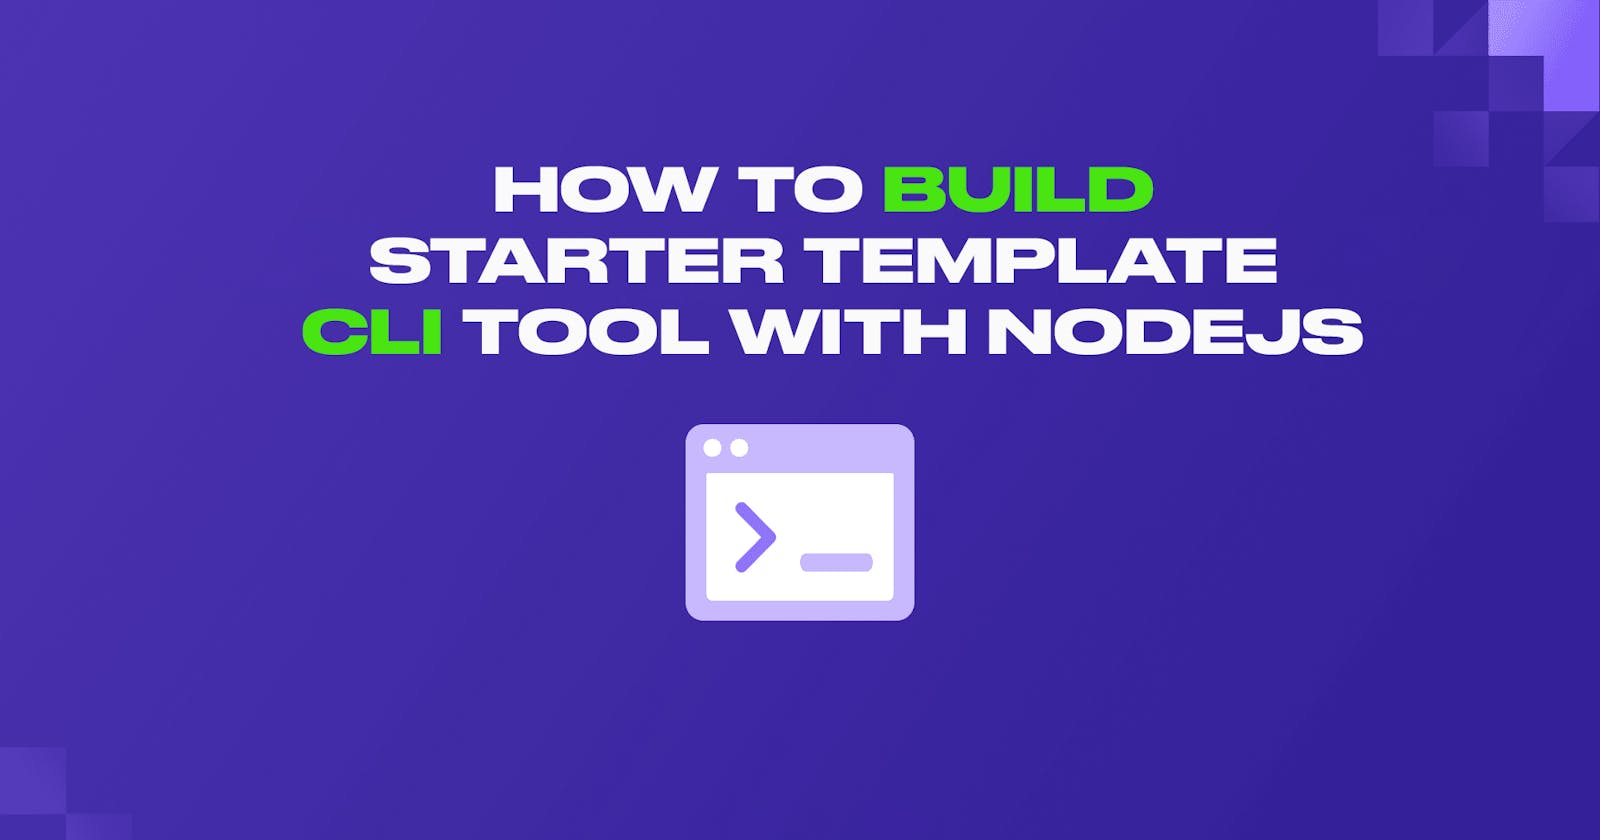 How To Build A Project Starter Template CLI Tool with NodeJs